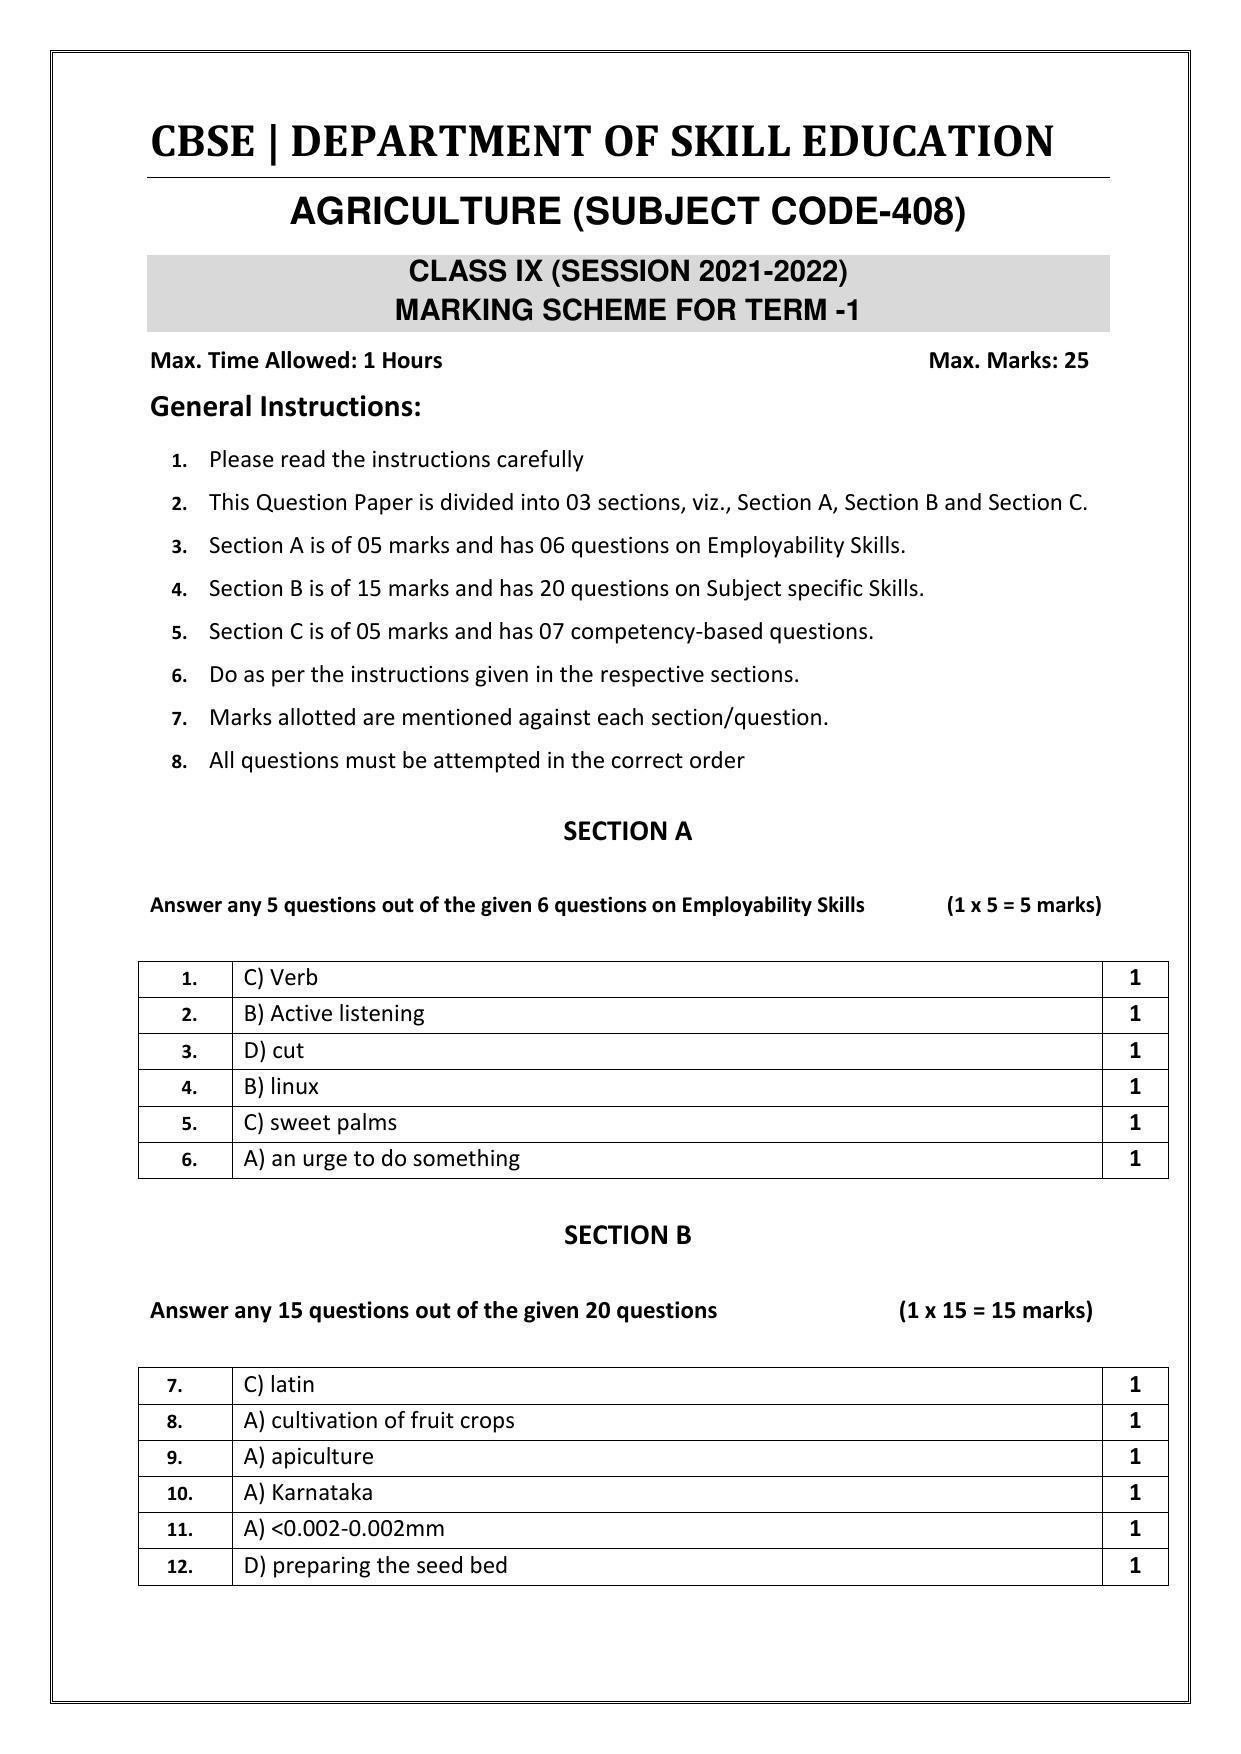 CBSE Class 10 Skill Education (Term I) - Agriculture Marking Scheme 2021-22 - Page 1